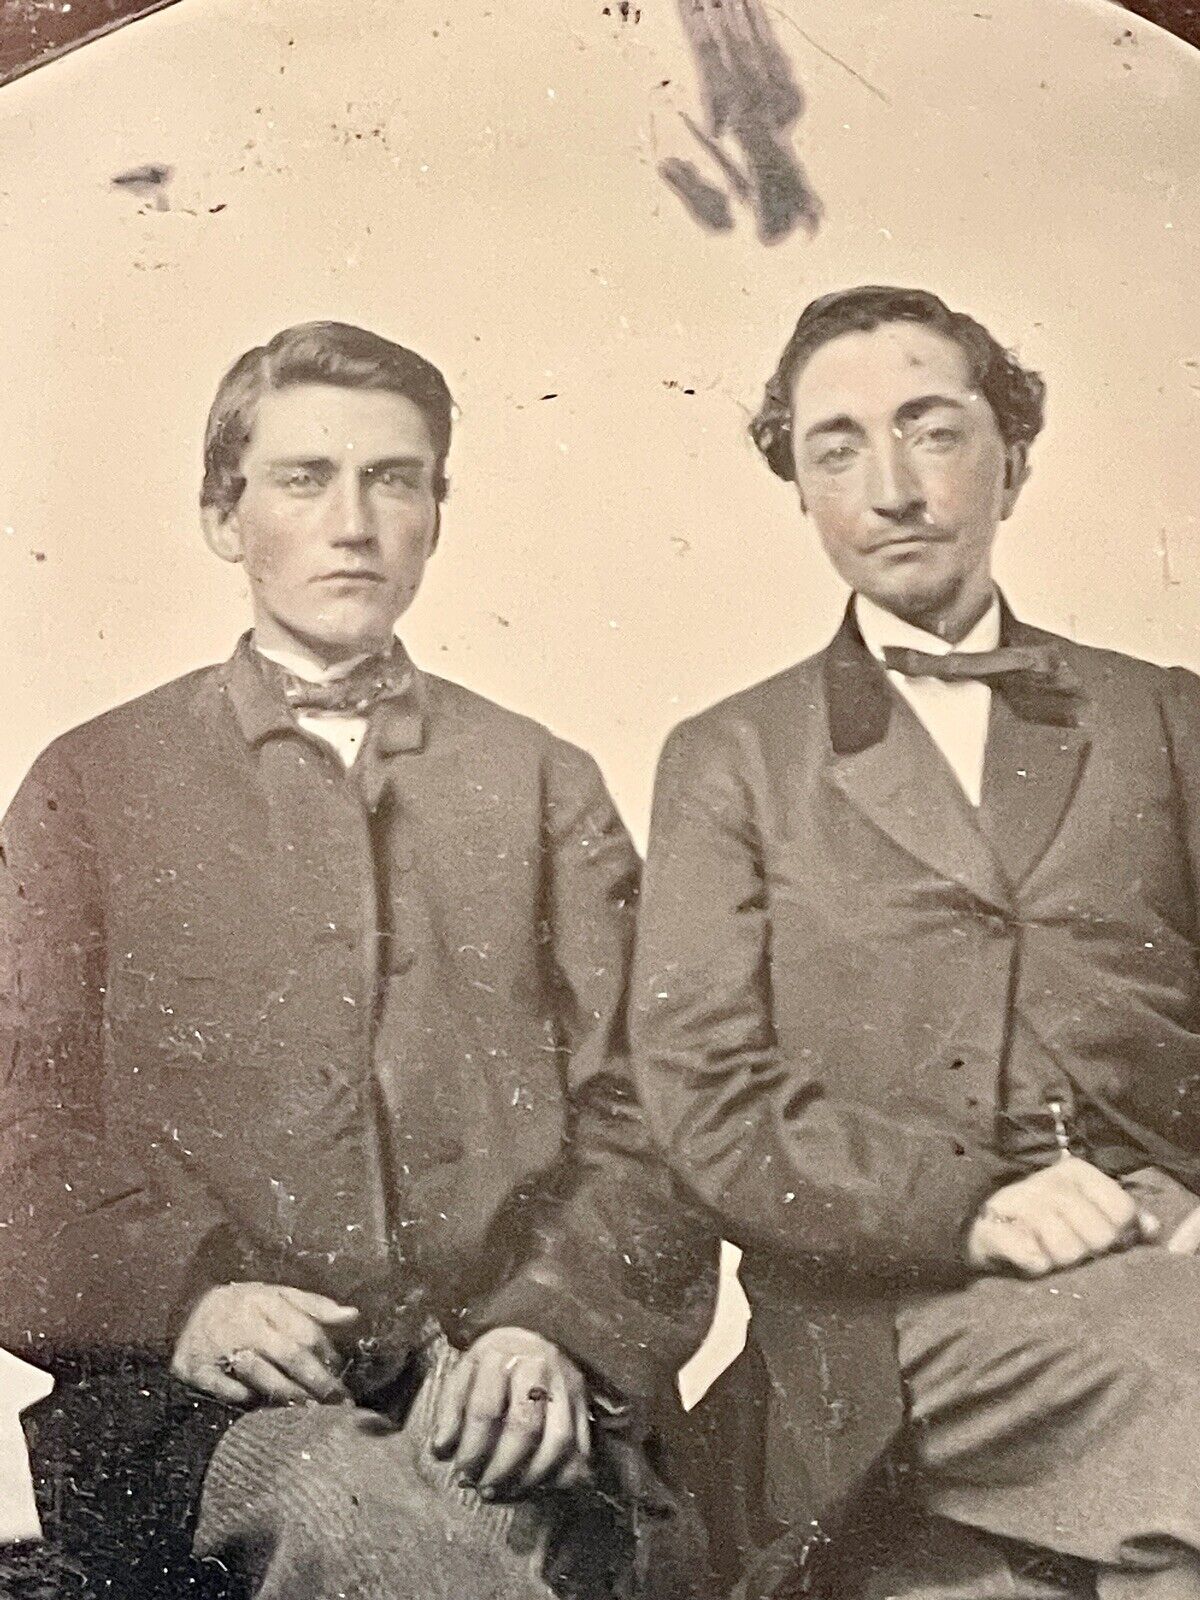 Excellent Mid-19th Century Ambrotype Photo - Handsome Young Men Posing